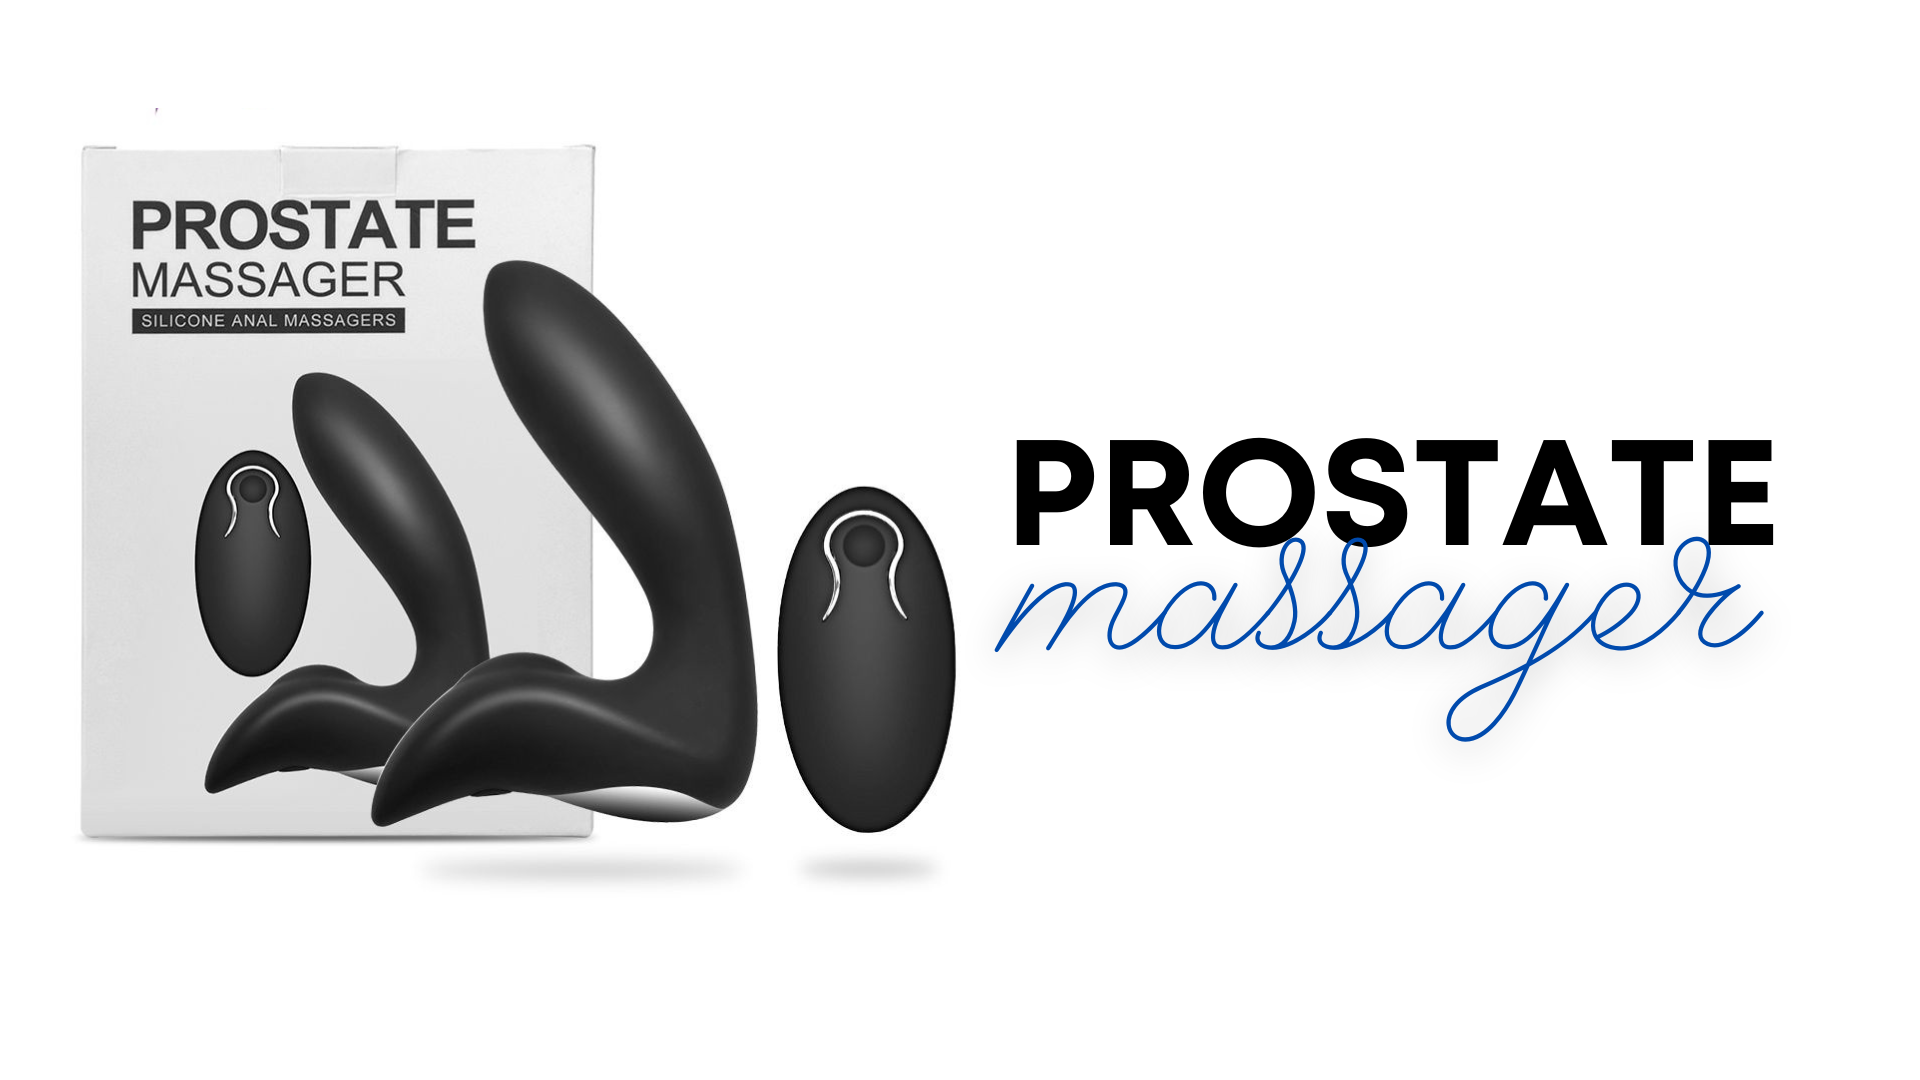 A black Prostate Massager with box